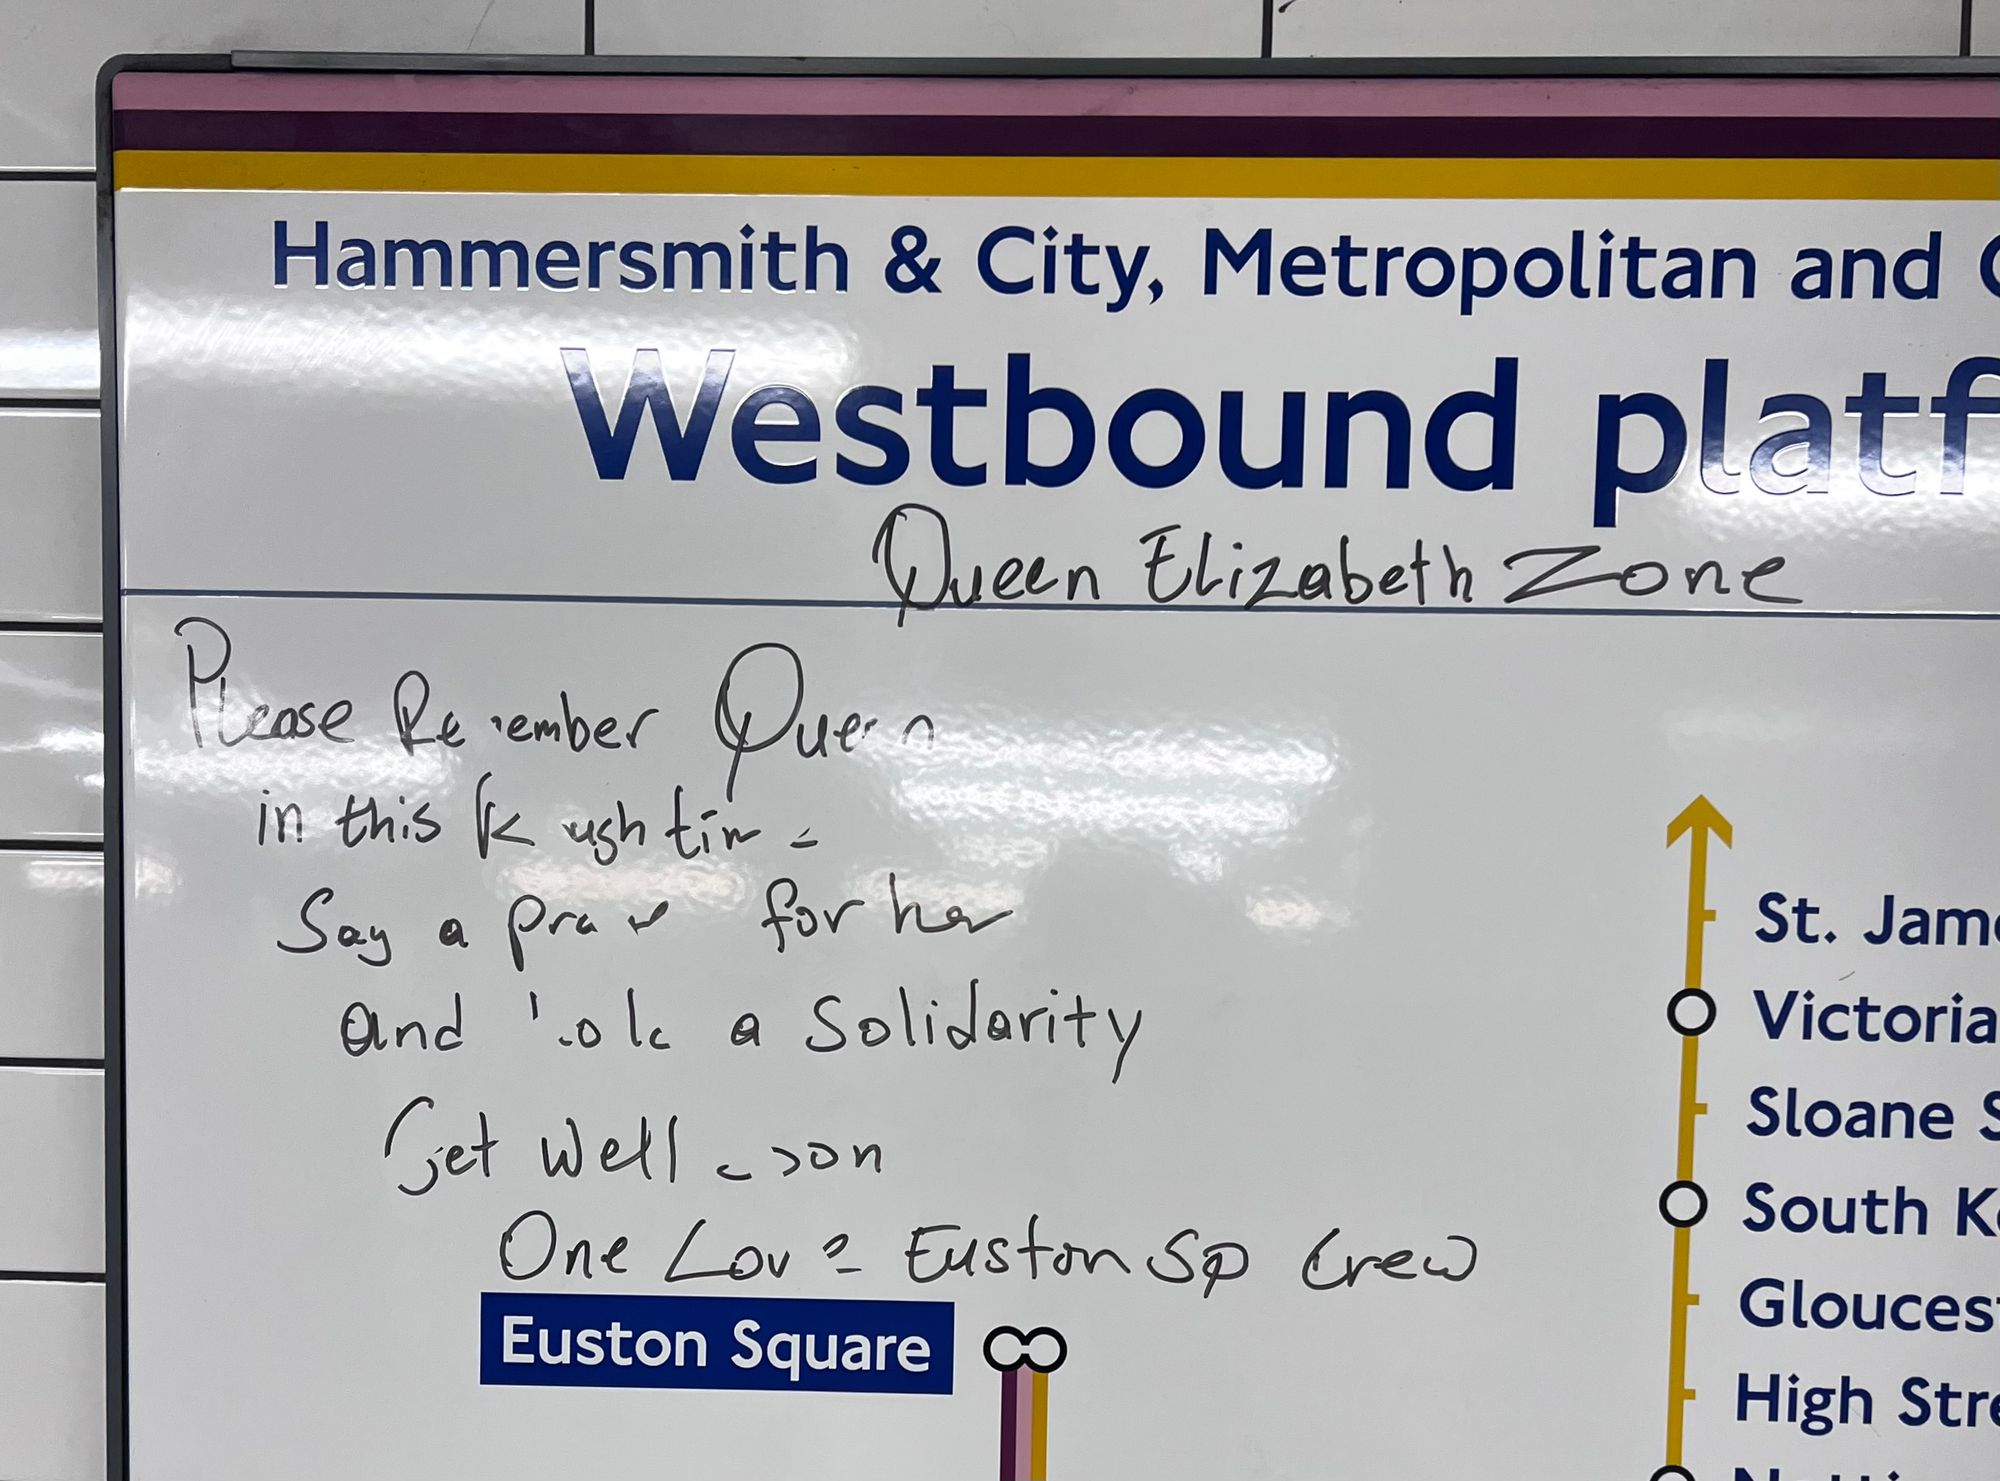 In marker pen: "Queen Elizabeth Zone. Please remember Queen in this Rush time - Say a pray for her and lotta solidarity. Get well soon. One love Euston Sq crew." On an enamel tube line diagram for westbound trains at Euston Square.